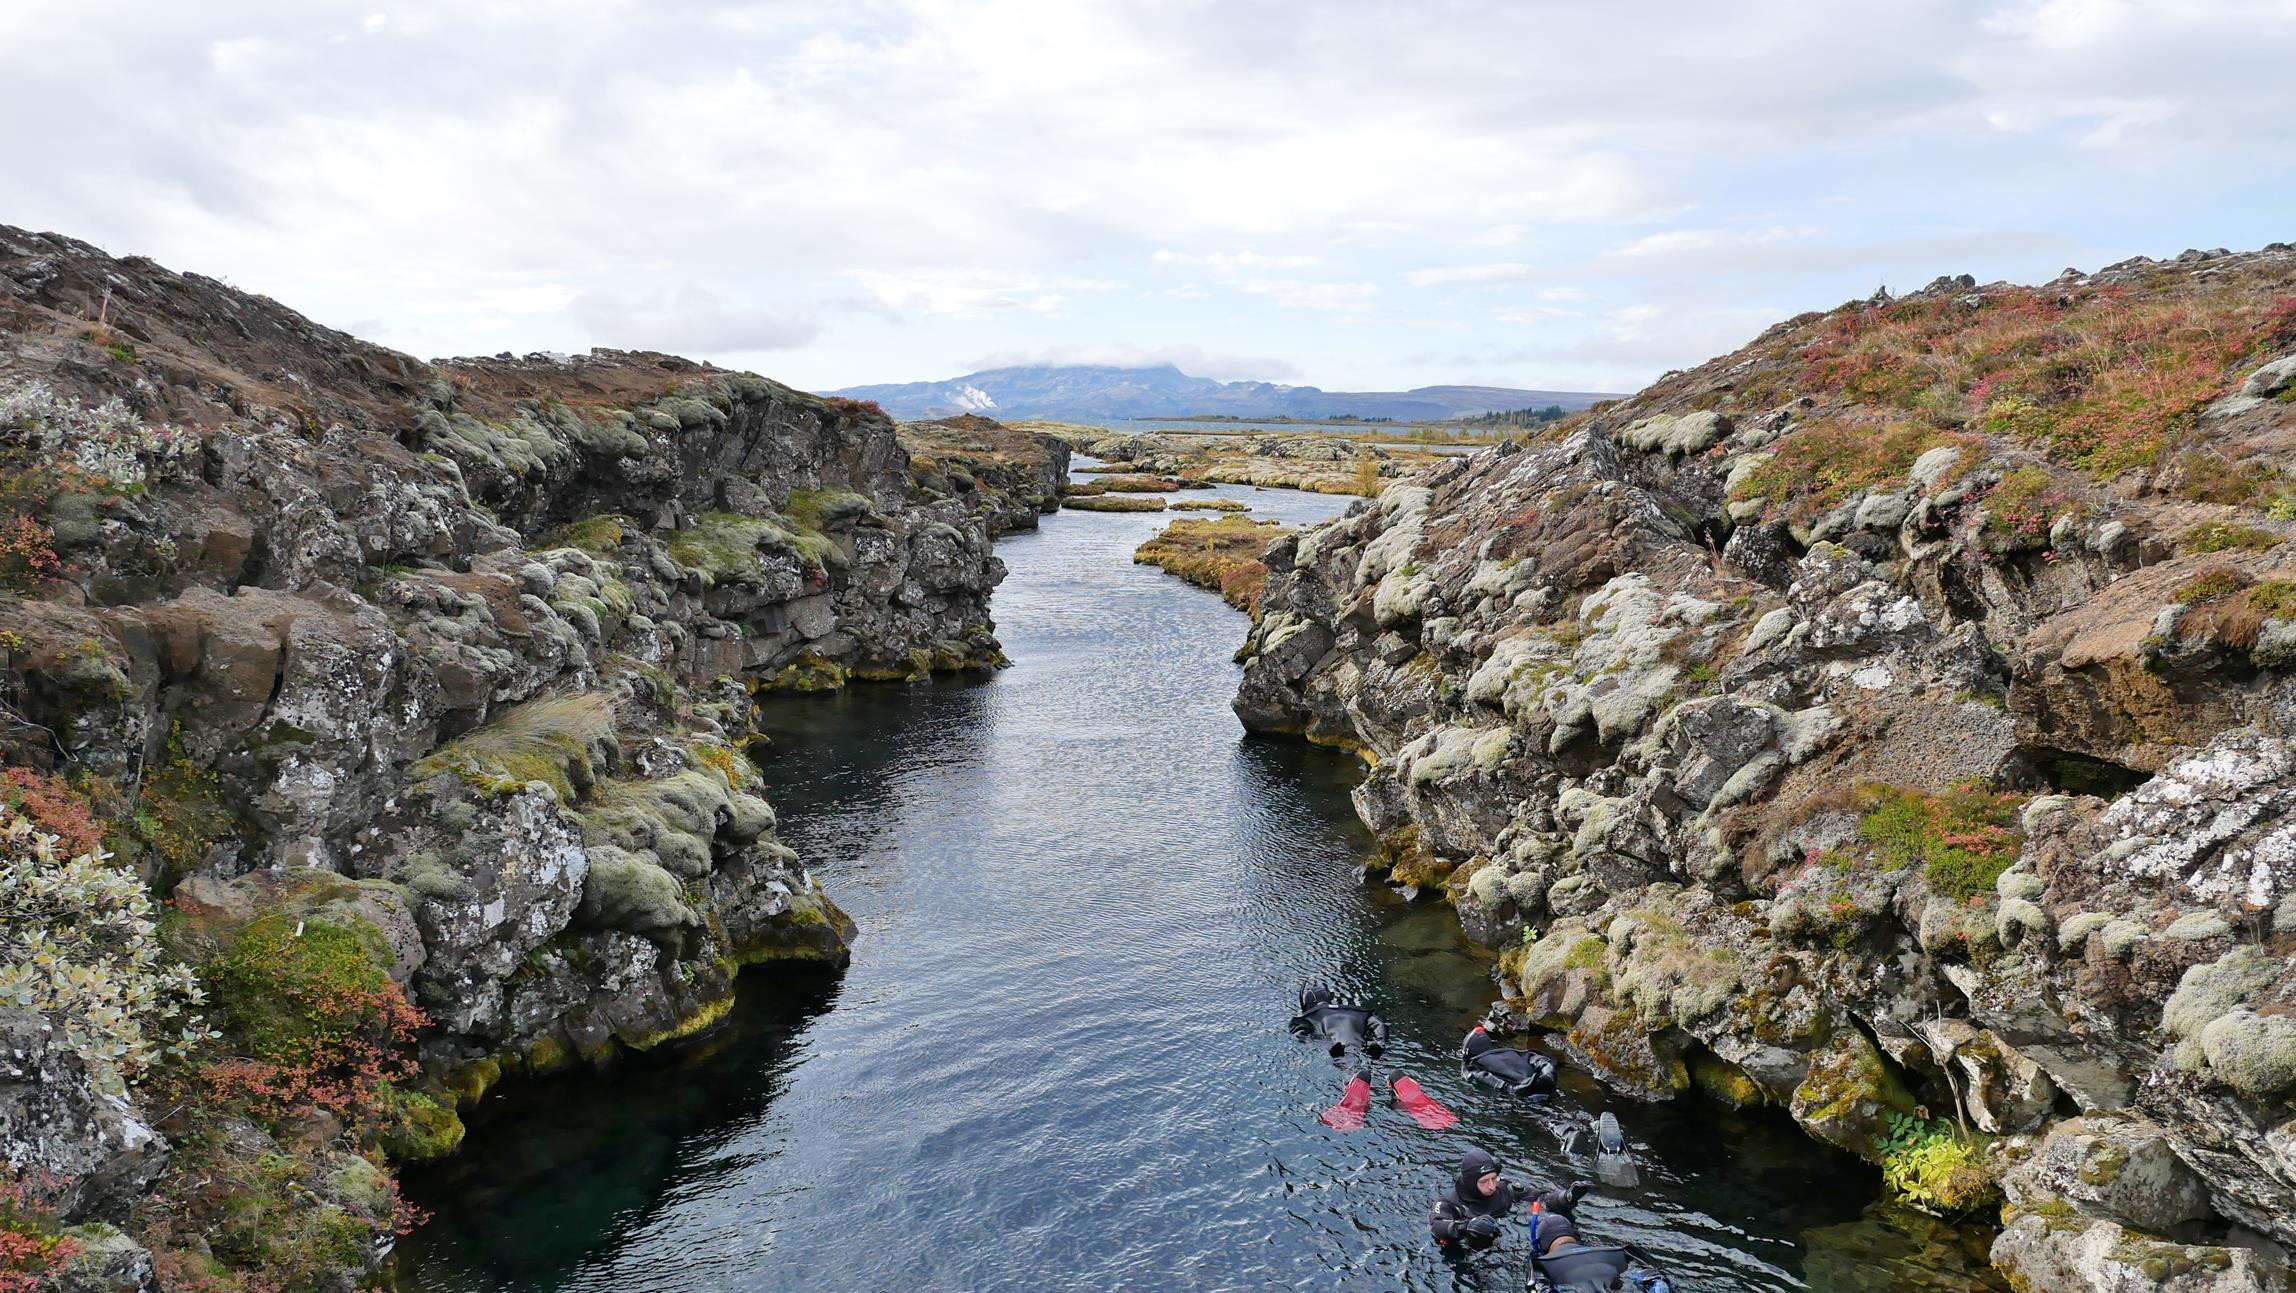 At Þingvellir (Thingvellir), the separating continental plates have formed deep fissures filled with crystal-clear water. It's a Mecca for divers